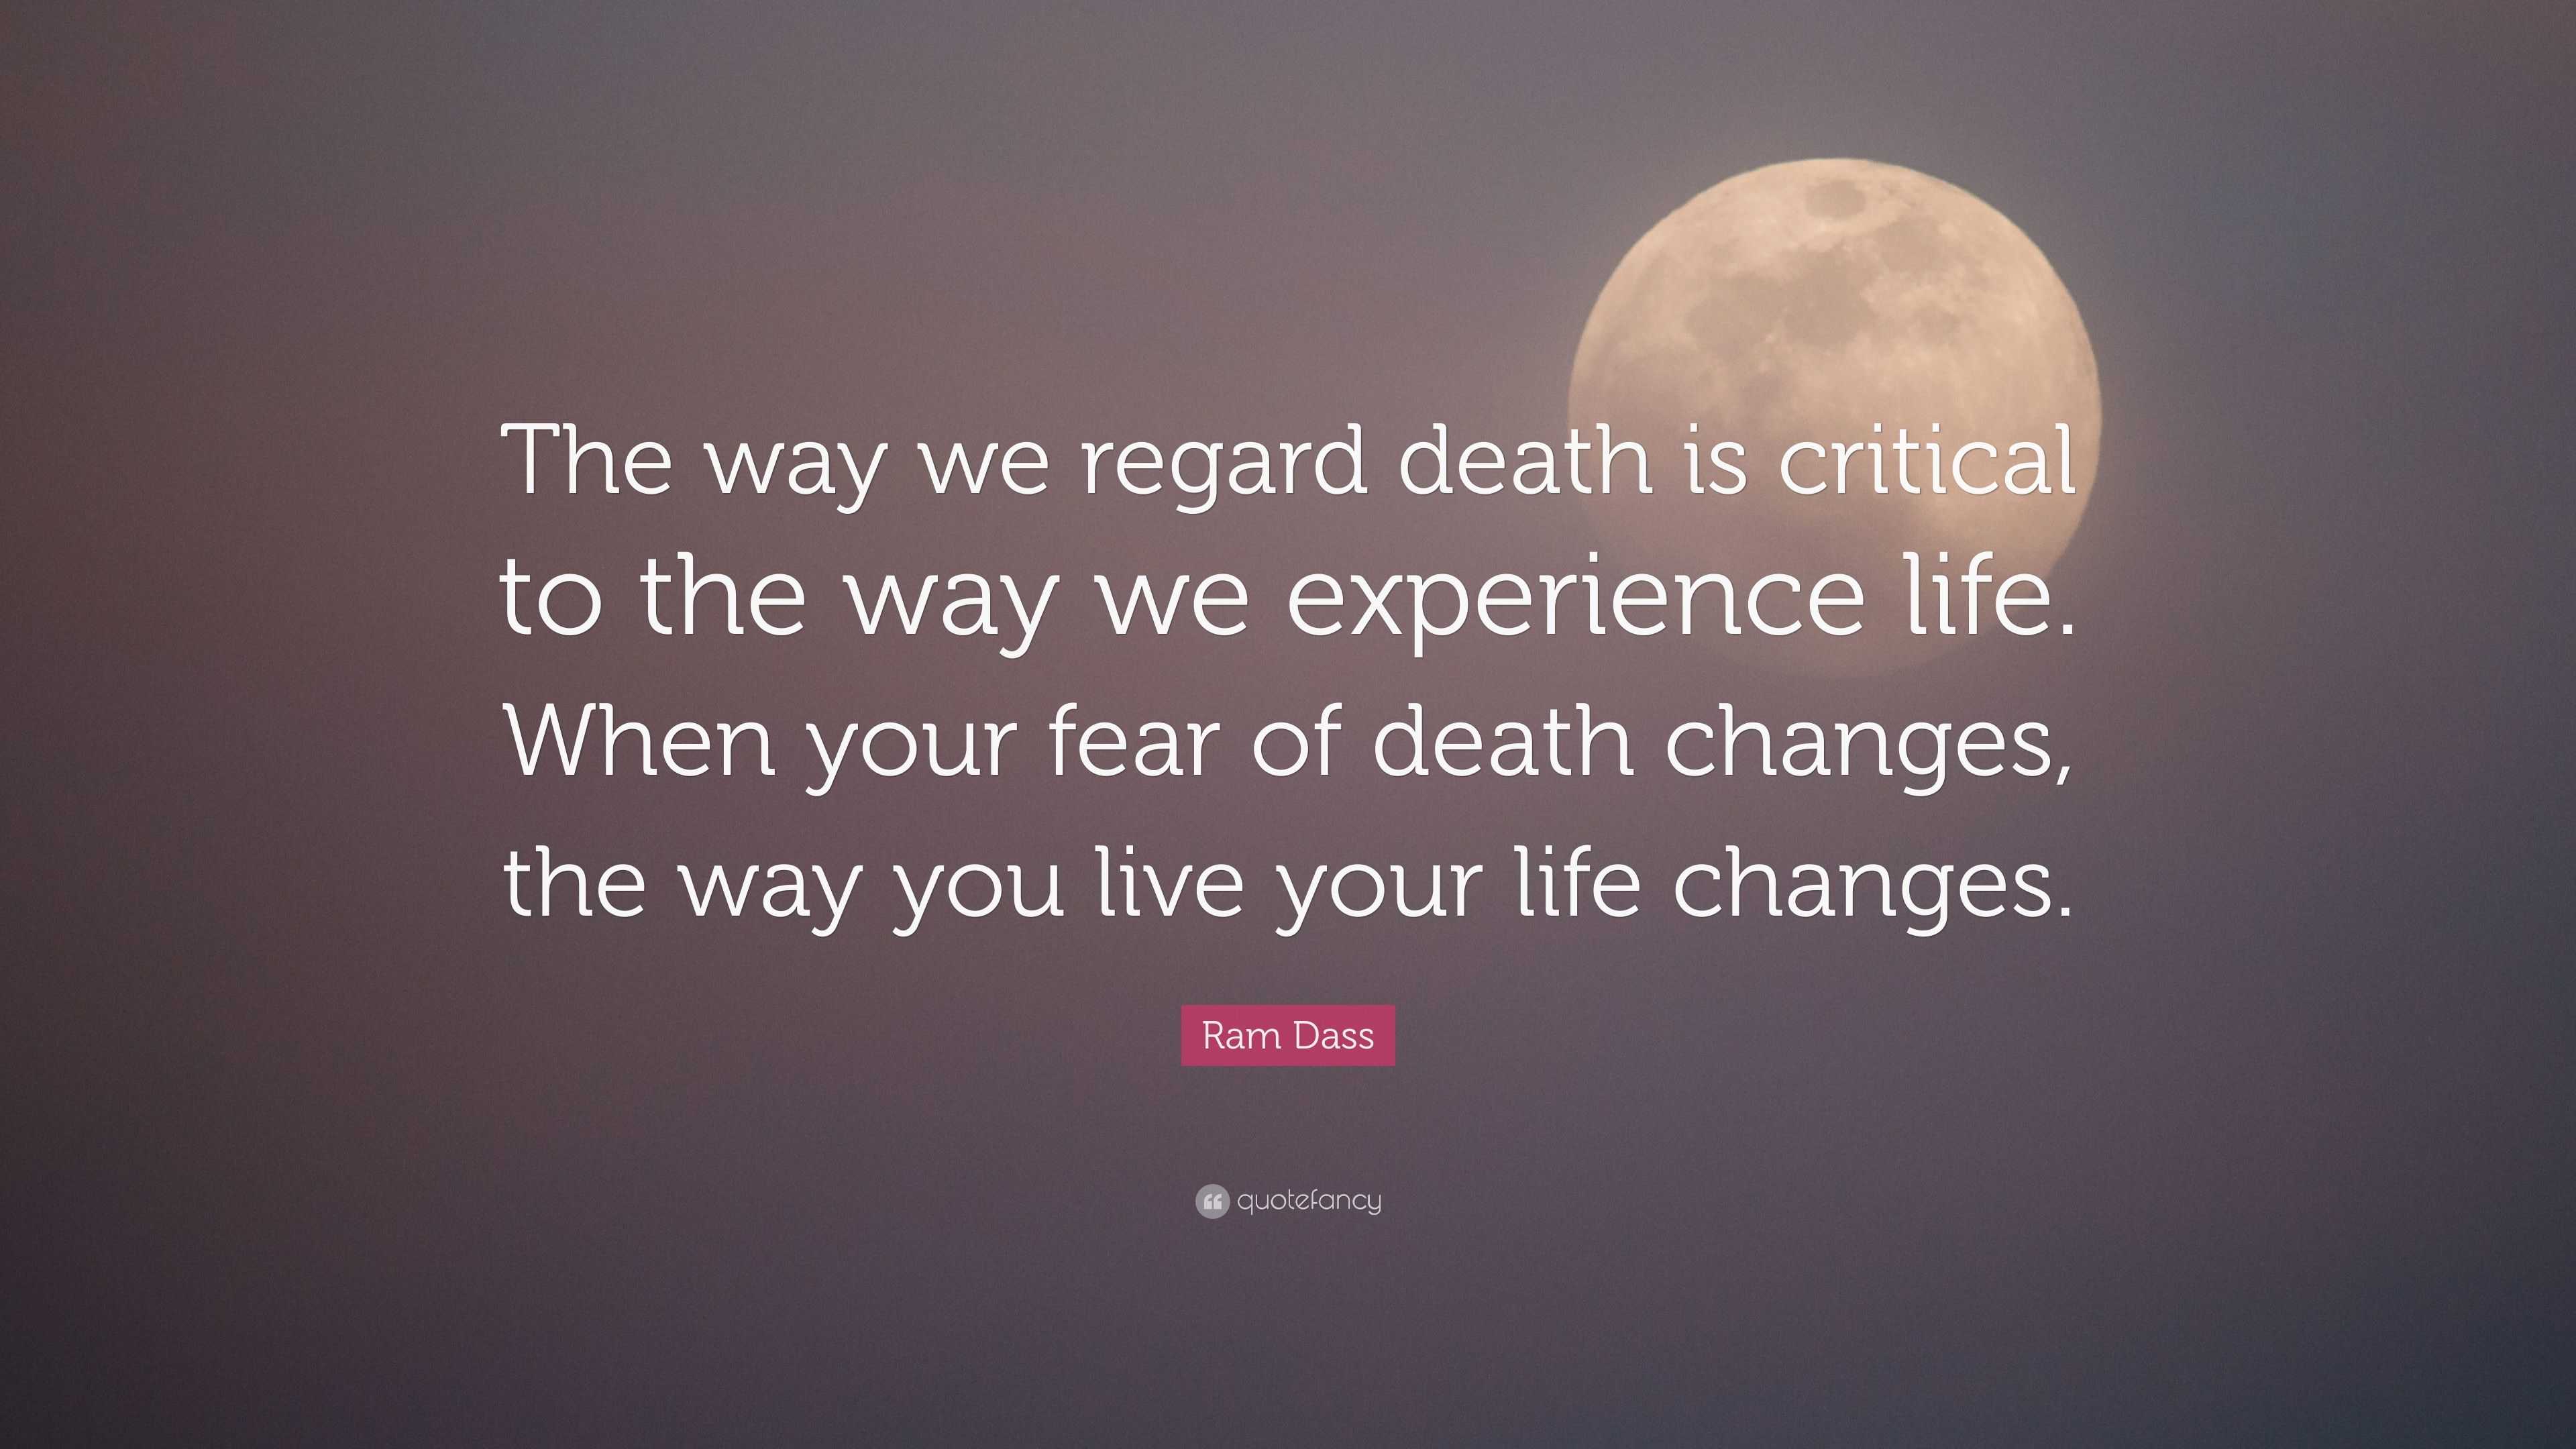 Ram Dass Quote: “The way we regard death is critical to the way we ...